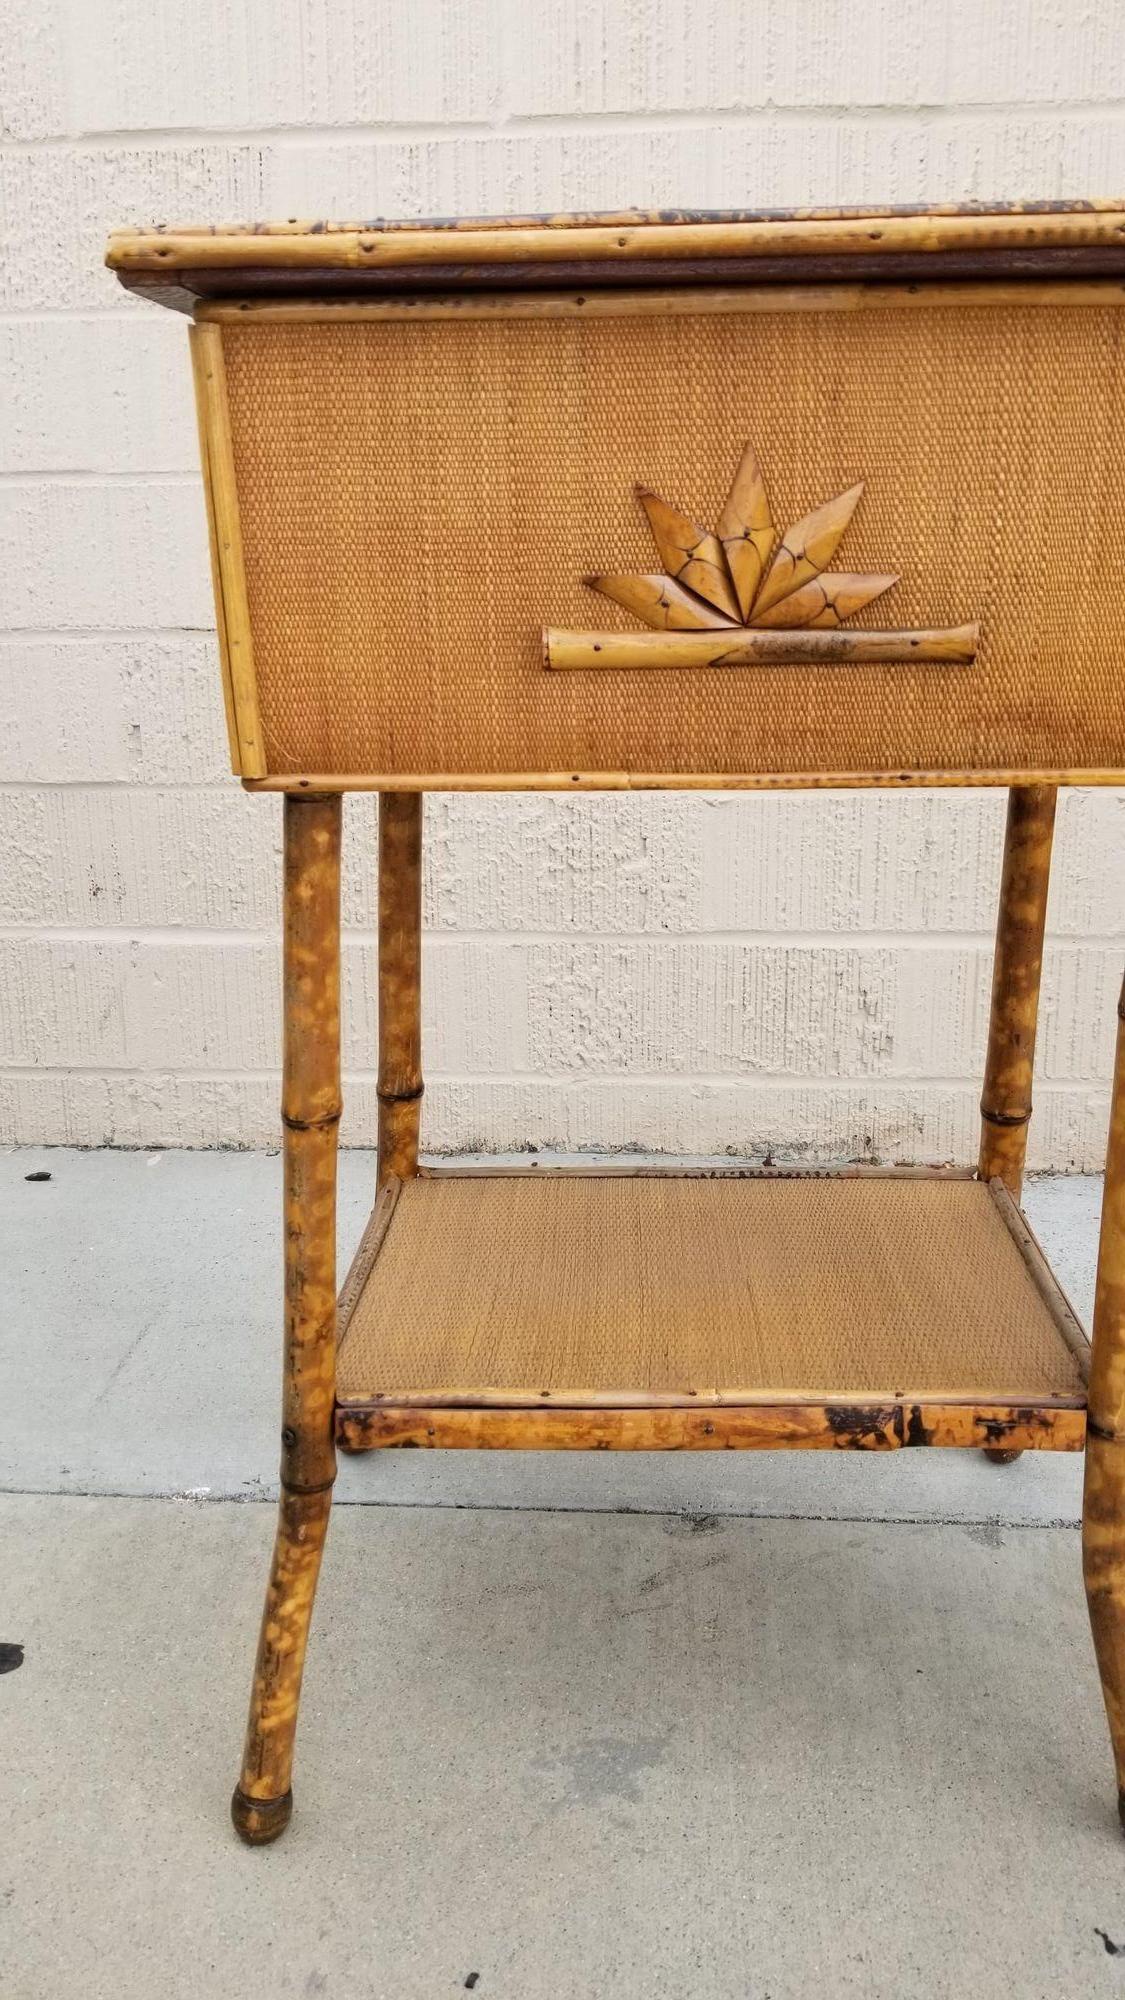 Antique tiger bamboo, also known as tortoise shell bamboo, pedestal side table with flip-open lid storage, and a secondary bottom shelf. With rice mat covering.
Restored to new for you.
All rattan, bamboo and wicker furniture has been